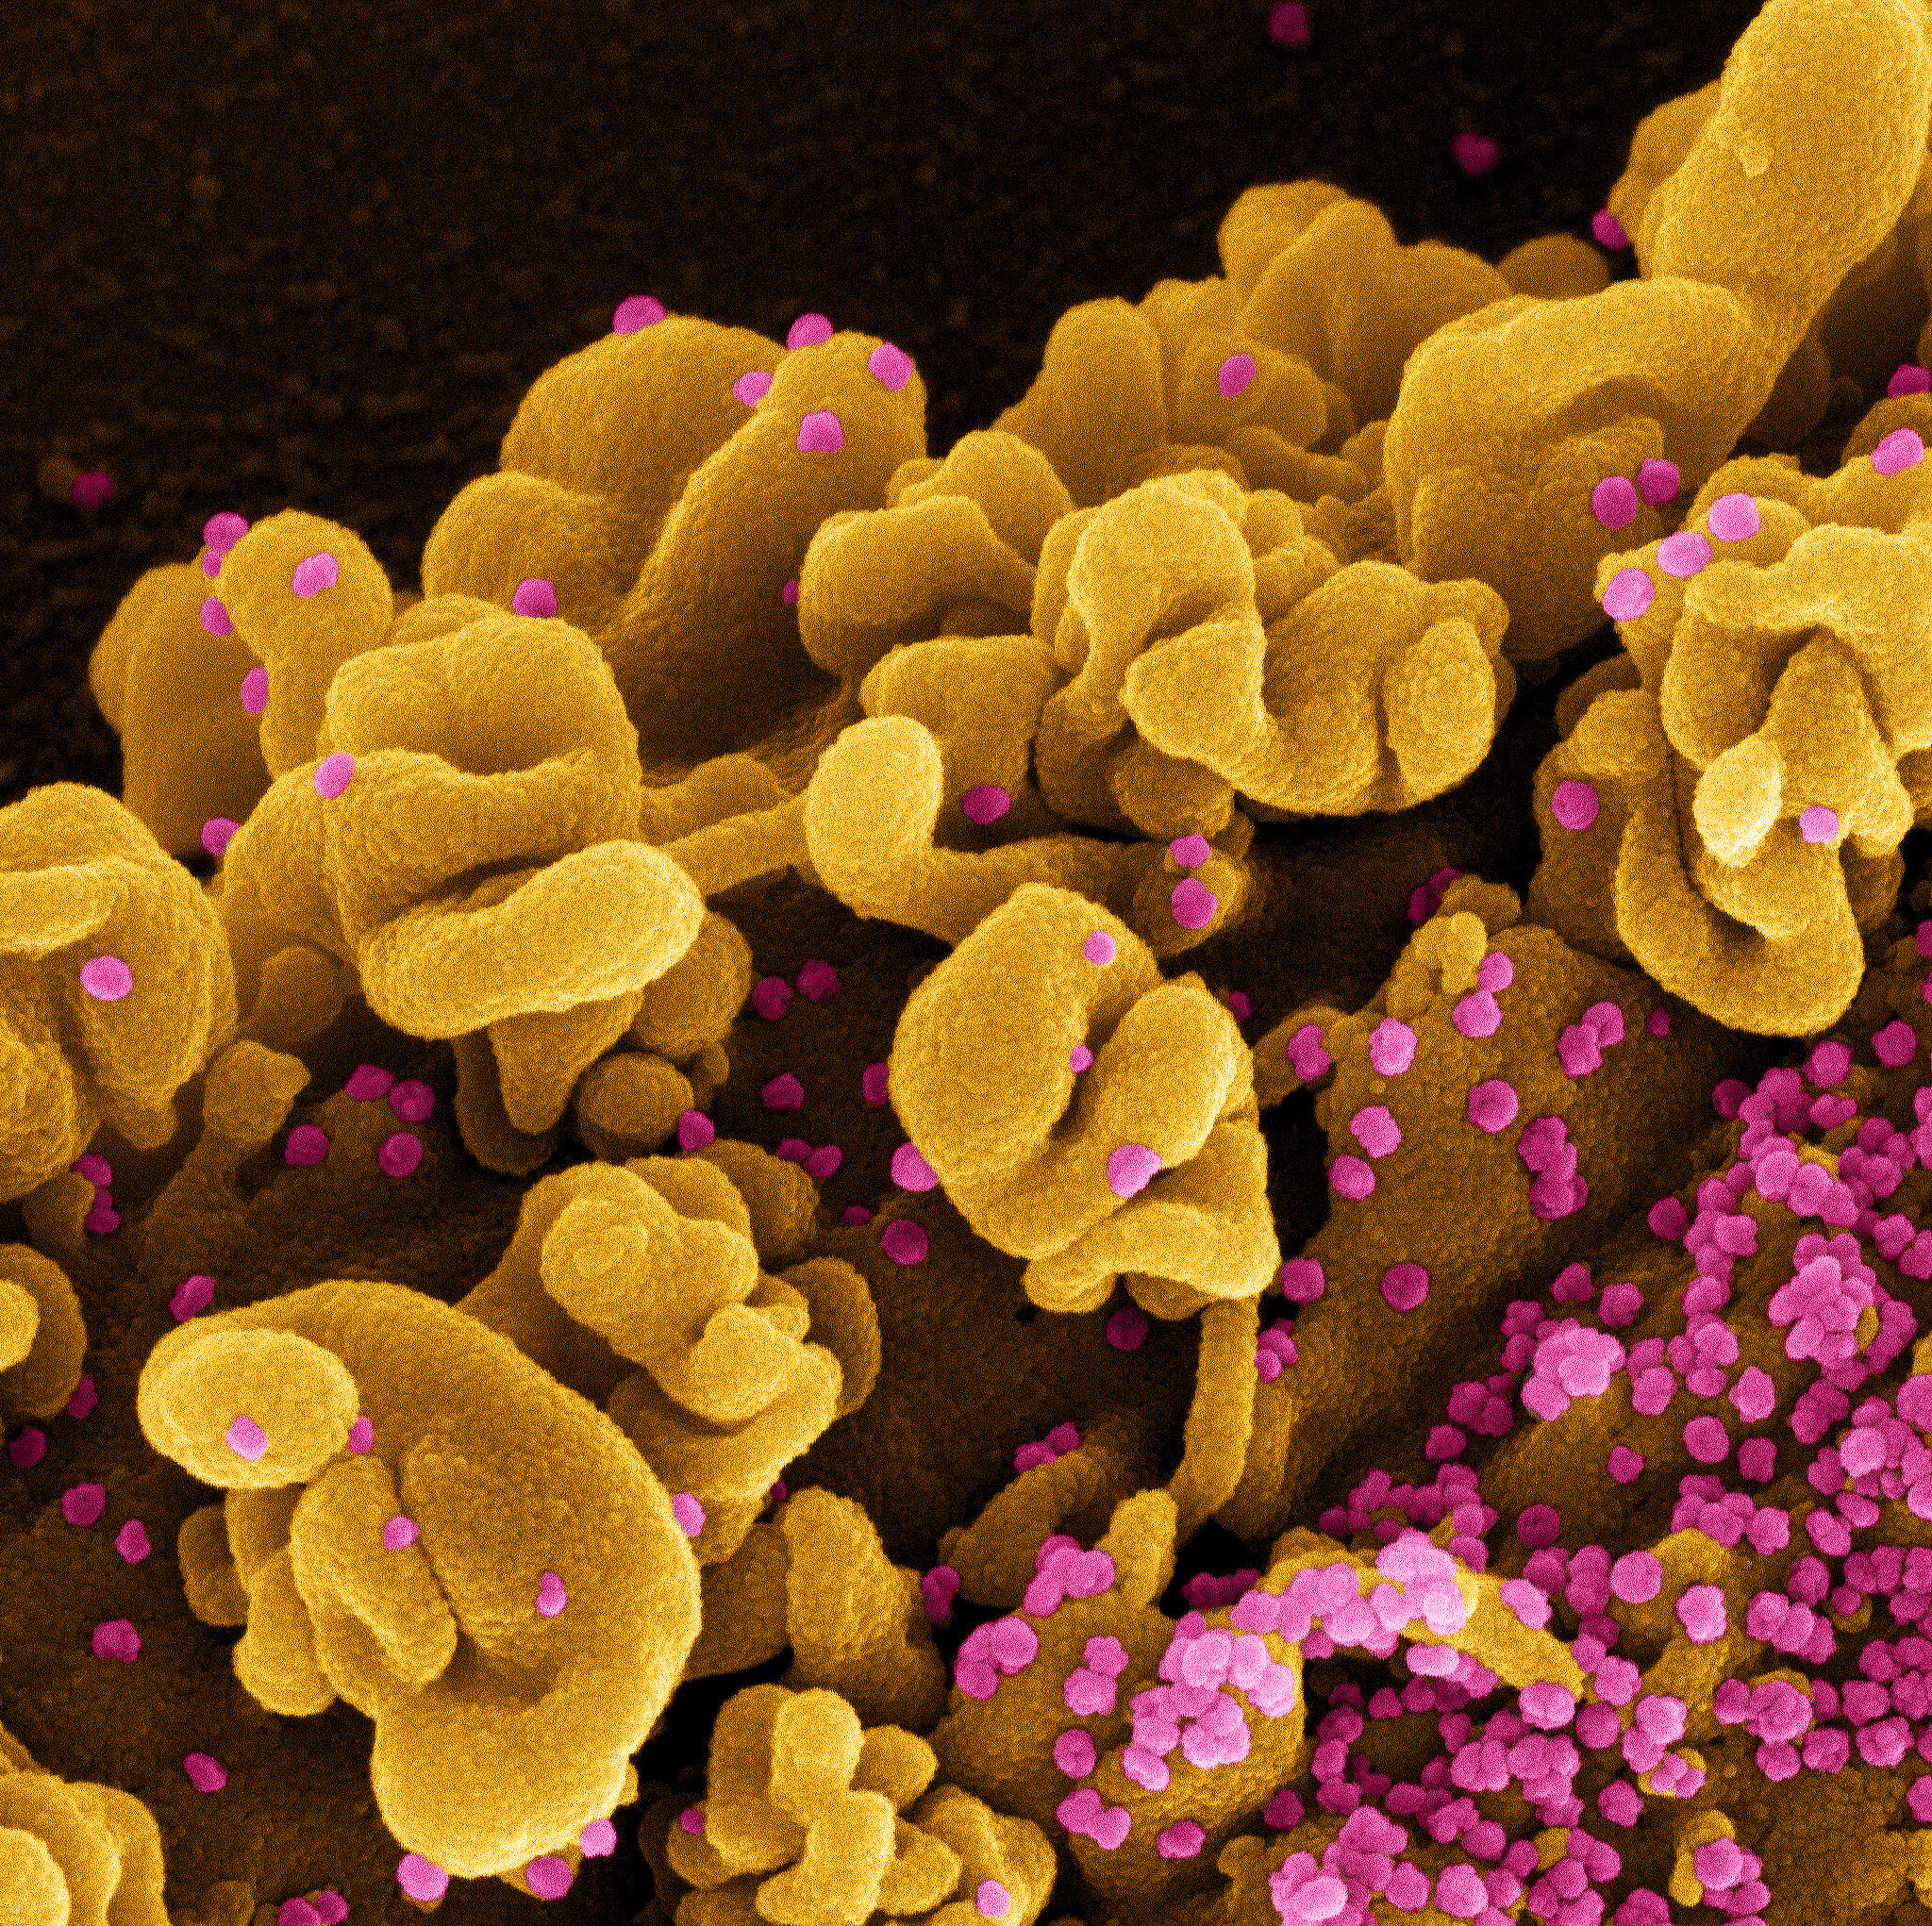 Colorized scanning electron micrograph of a cell infected with the Omicron strain of SARS-CoV-2 virus particles (pink), isolated from a patient sample. Image captured at the NIAID Integrated Research Facility (IRF) in Fort Detrick, Maryland.

CREDIT
NIAID